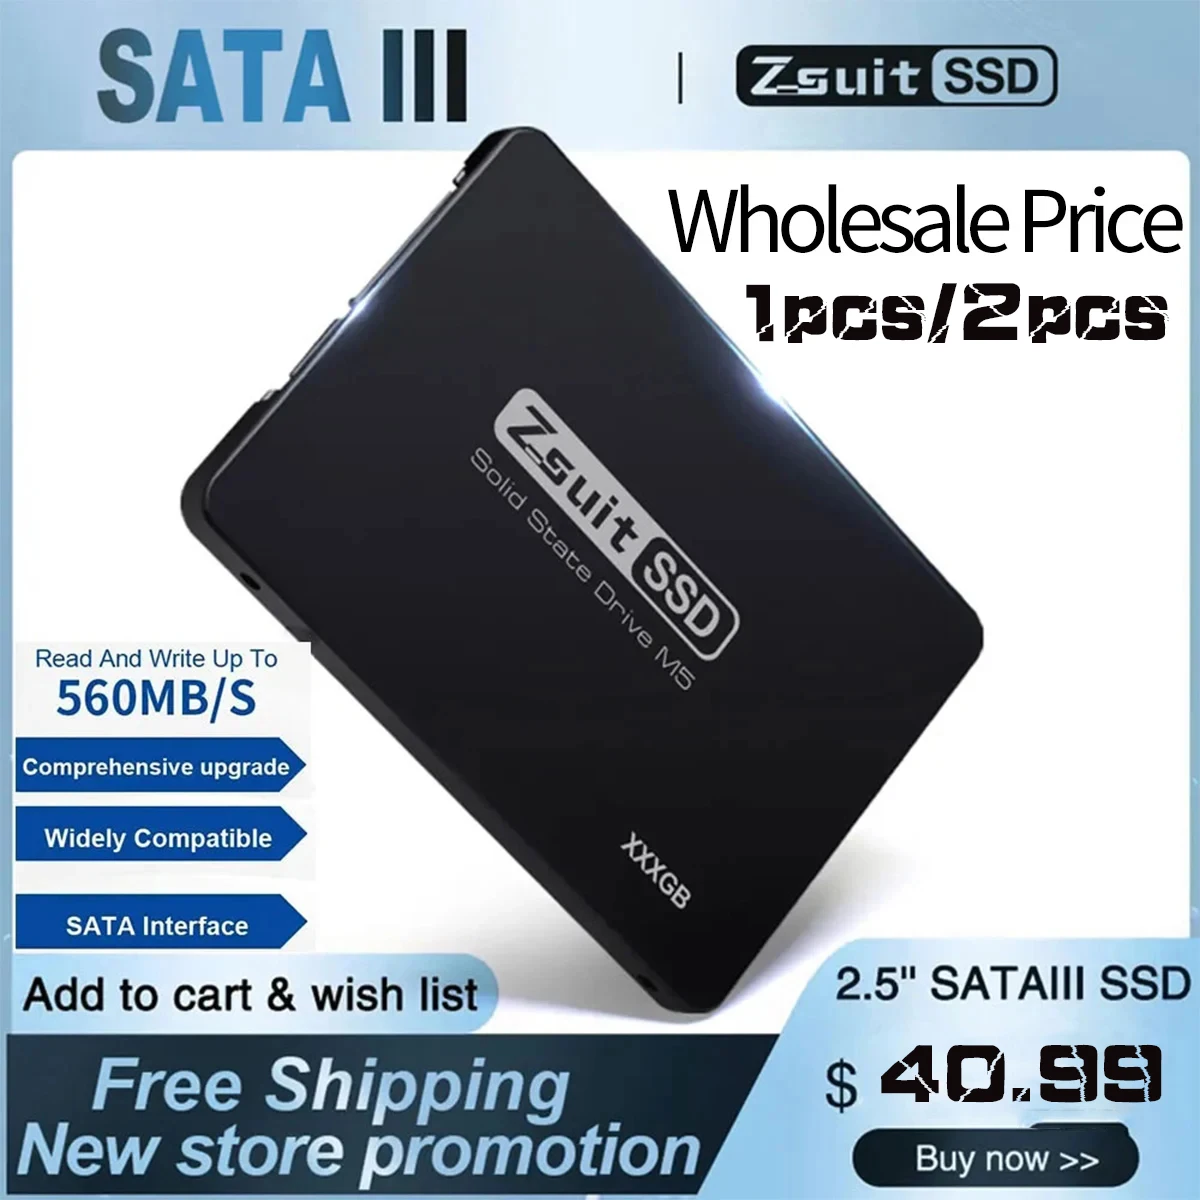 z-suit-ssd-1tb-2tb-sata-25-solid-state-drive-hdd-hard-disk-high-capacity-for-laptop-desktop-ssd-disk-wholesale-price-free-shipp